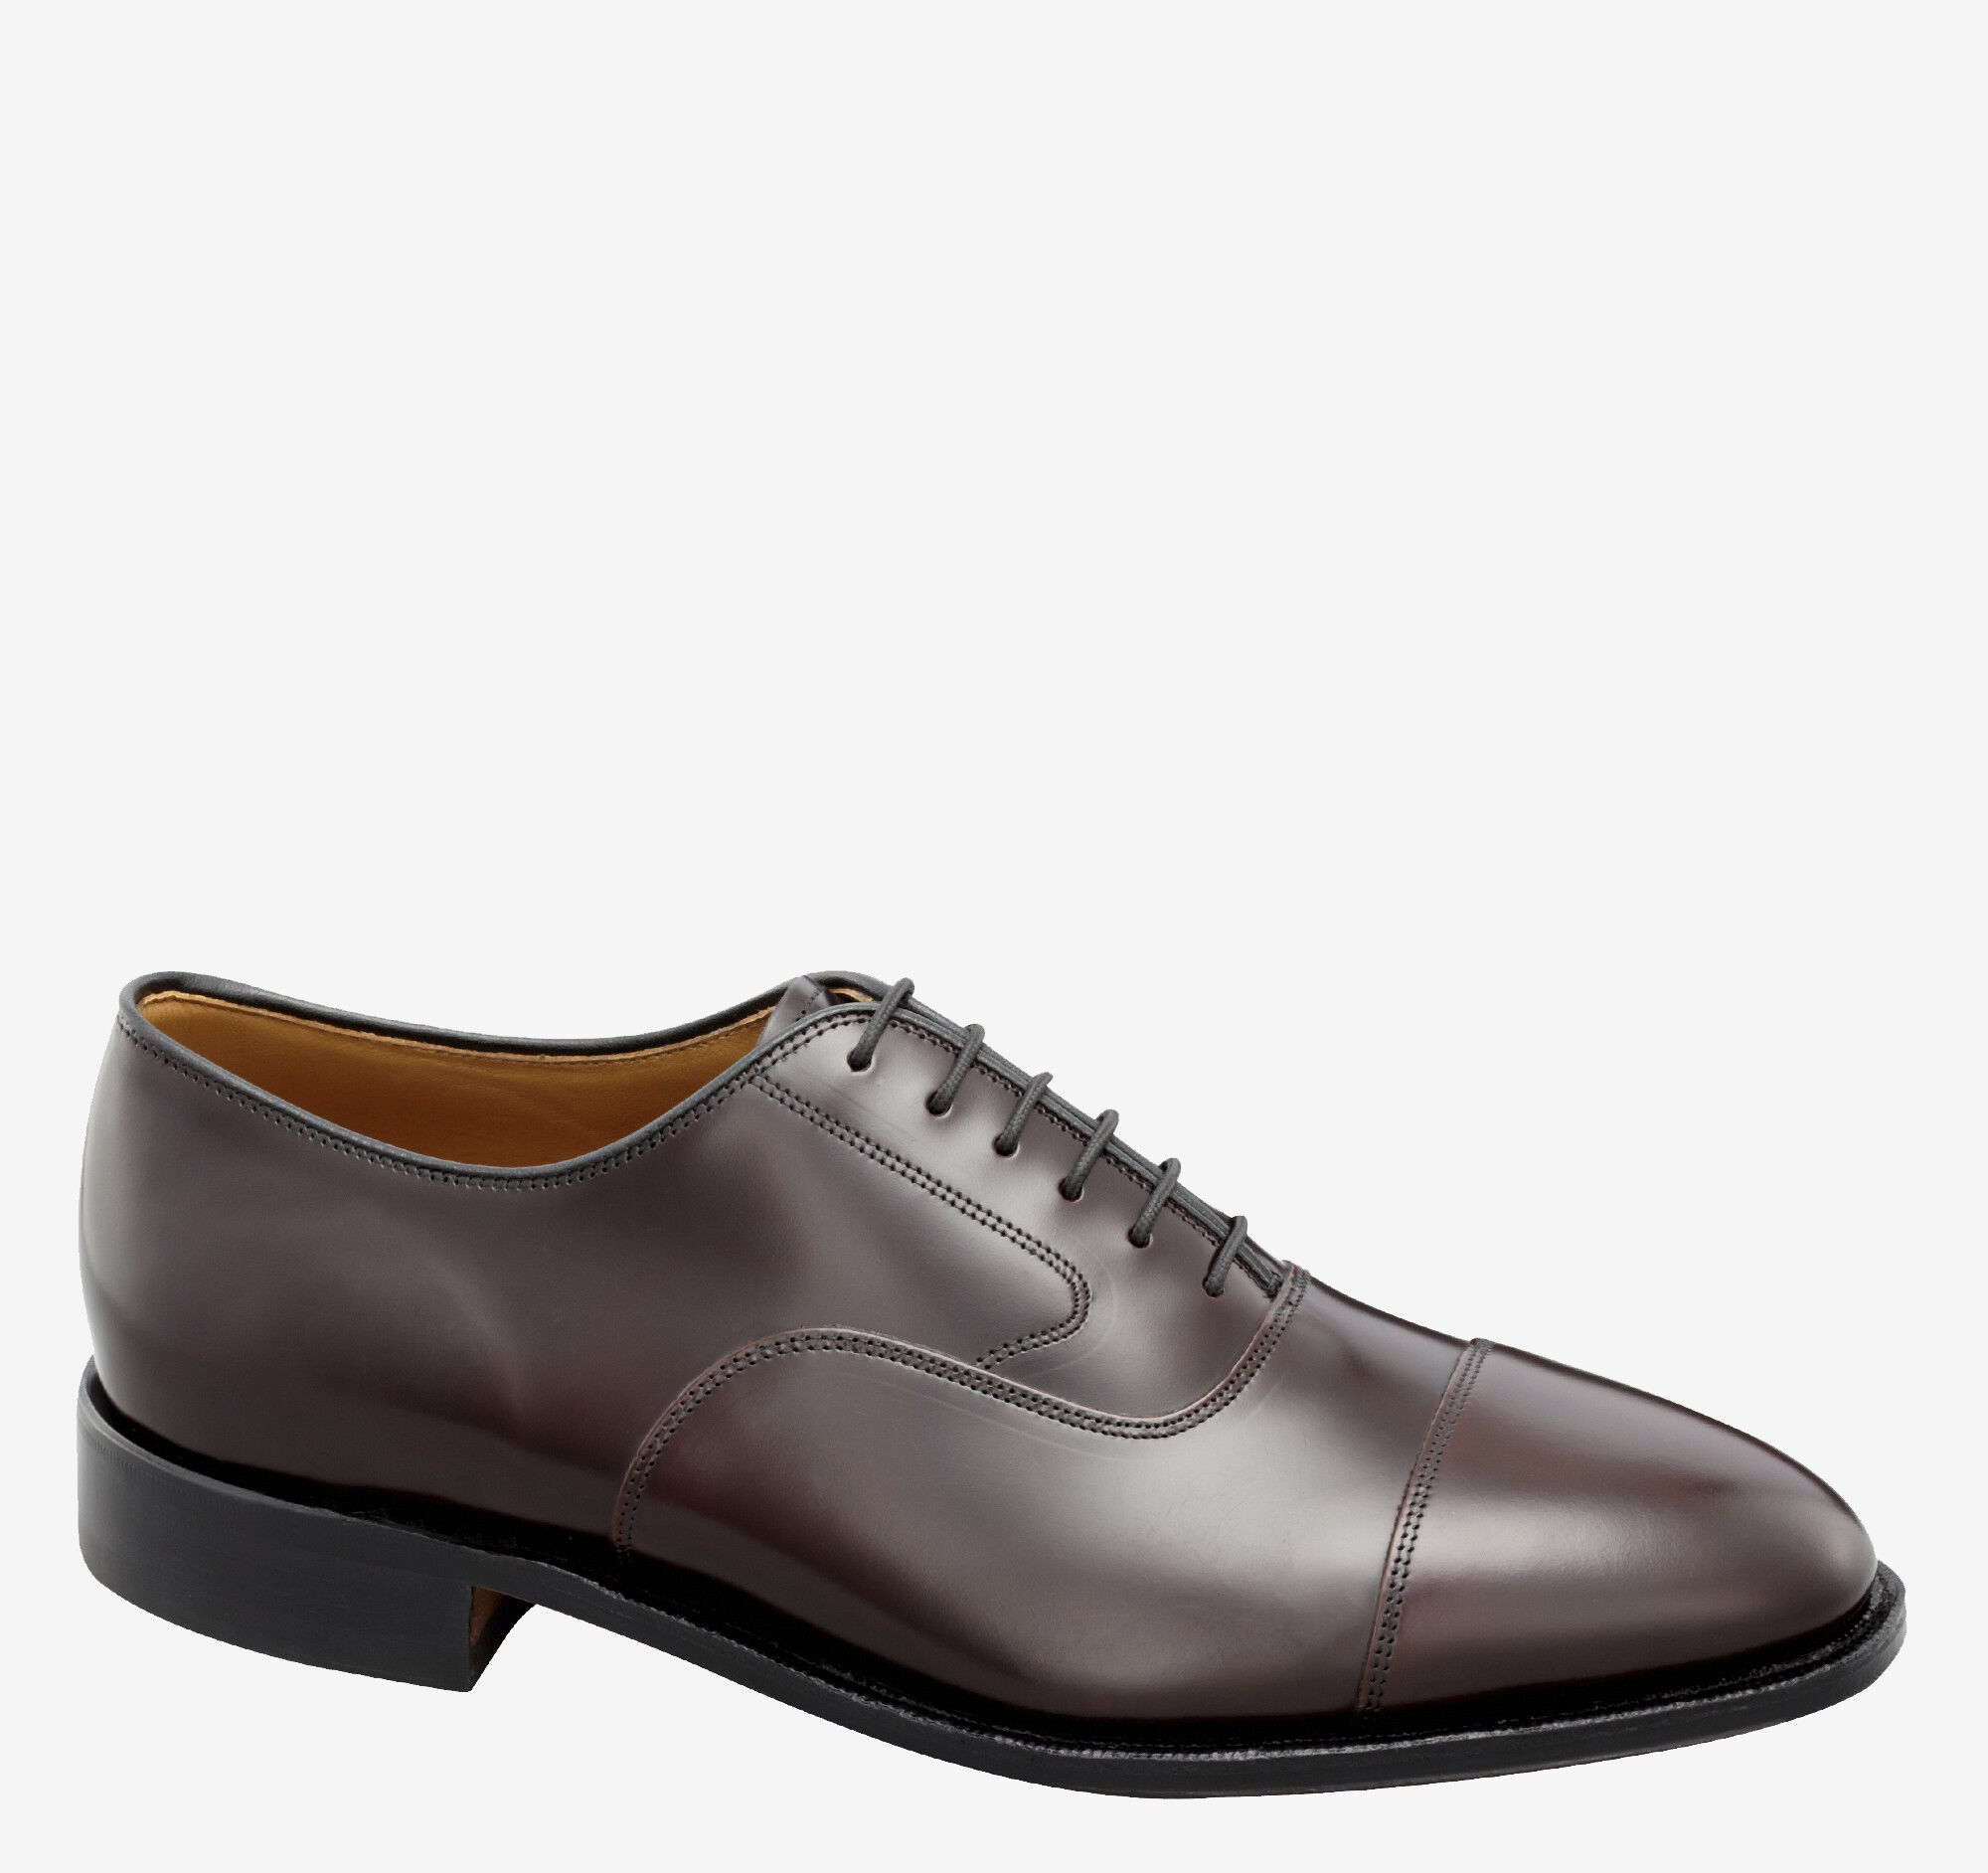 johnston and murphy burgundy shoes